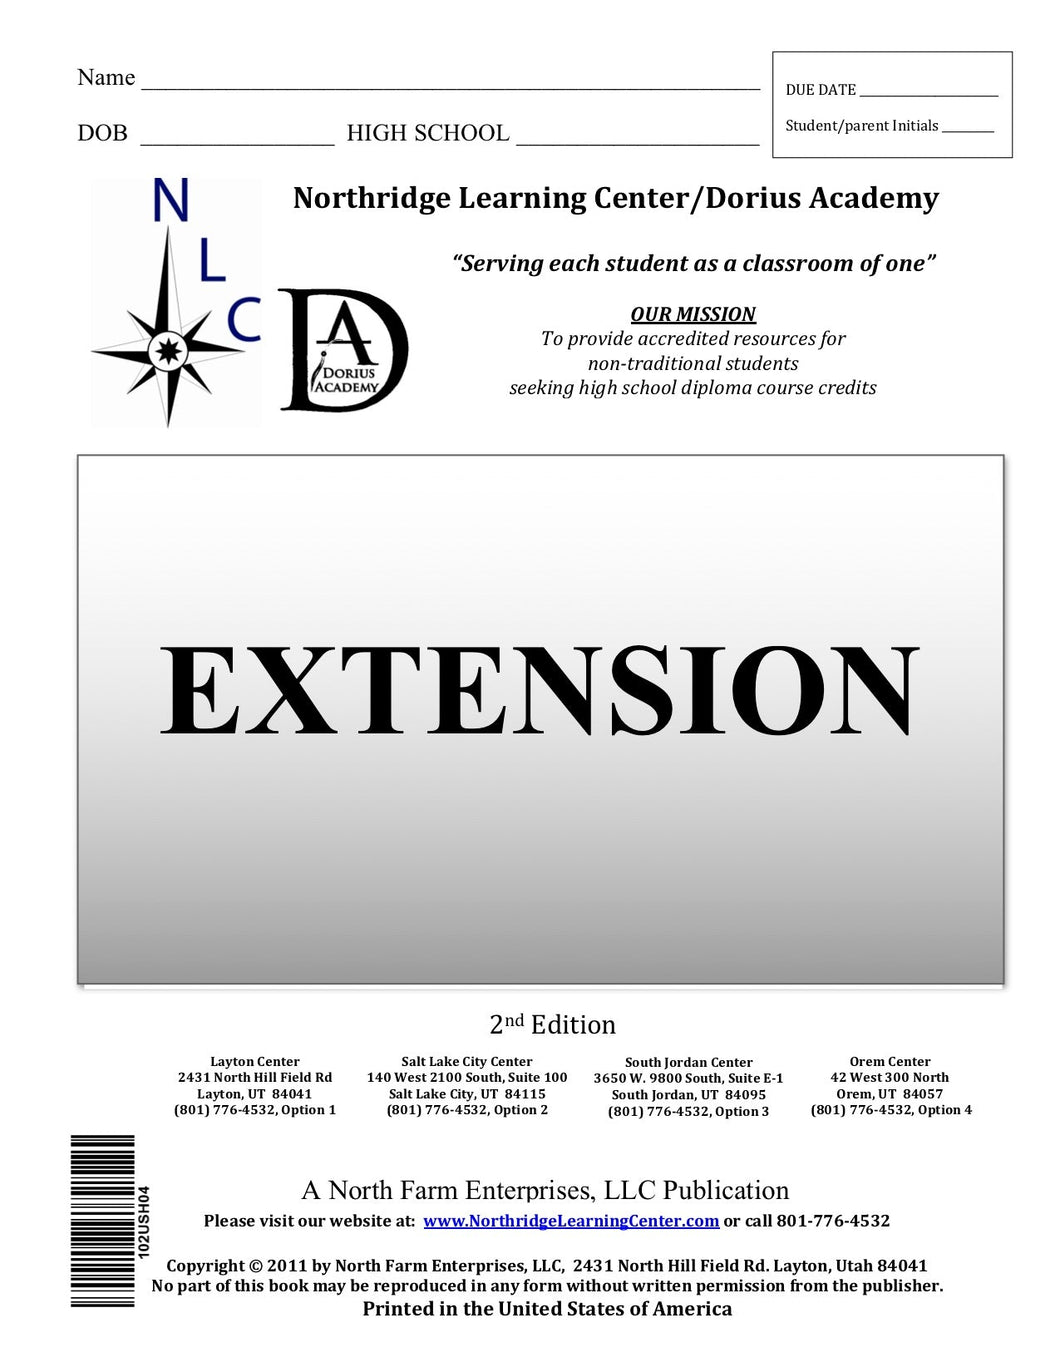 Earth Science, Section IV - Extension